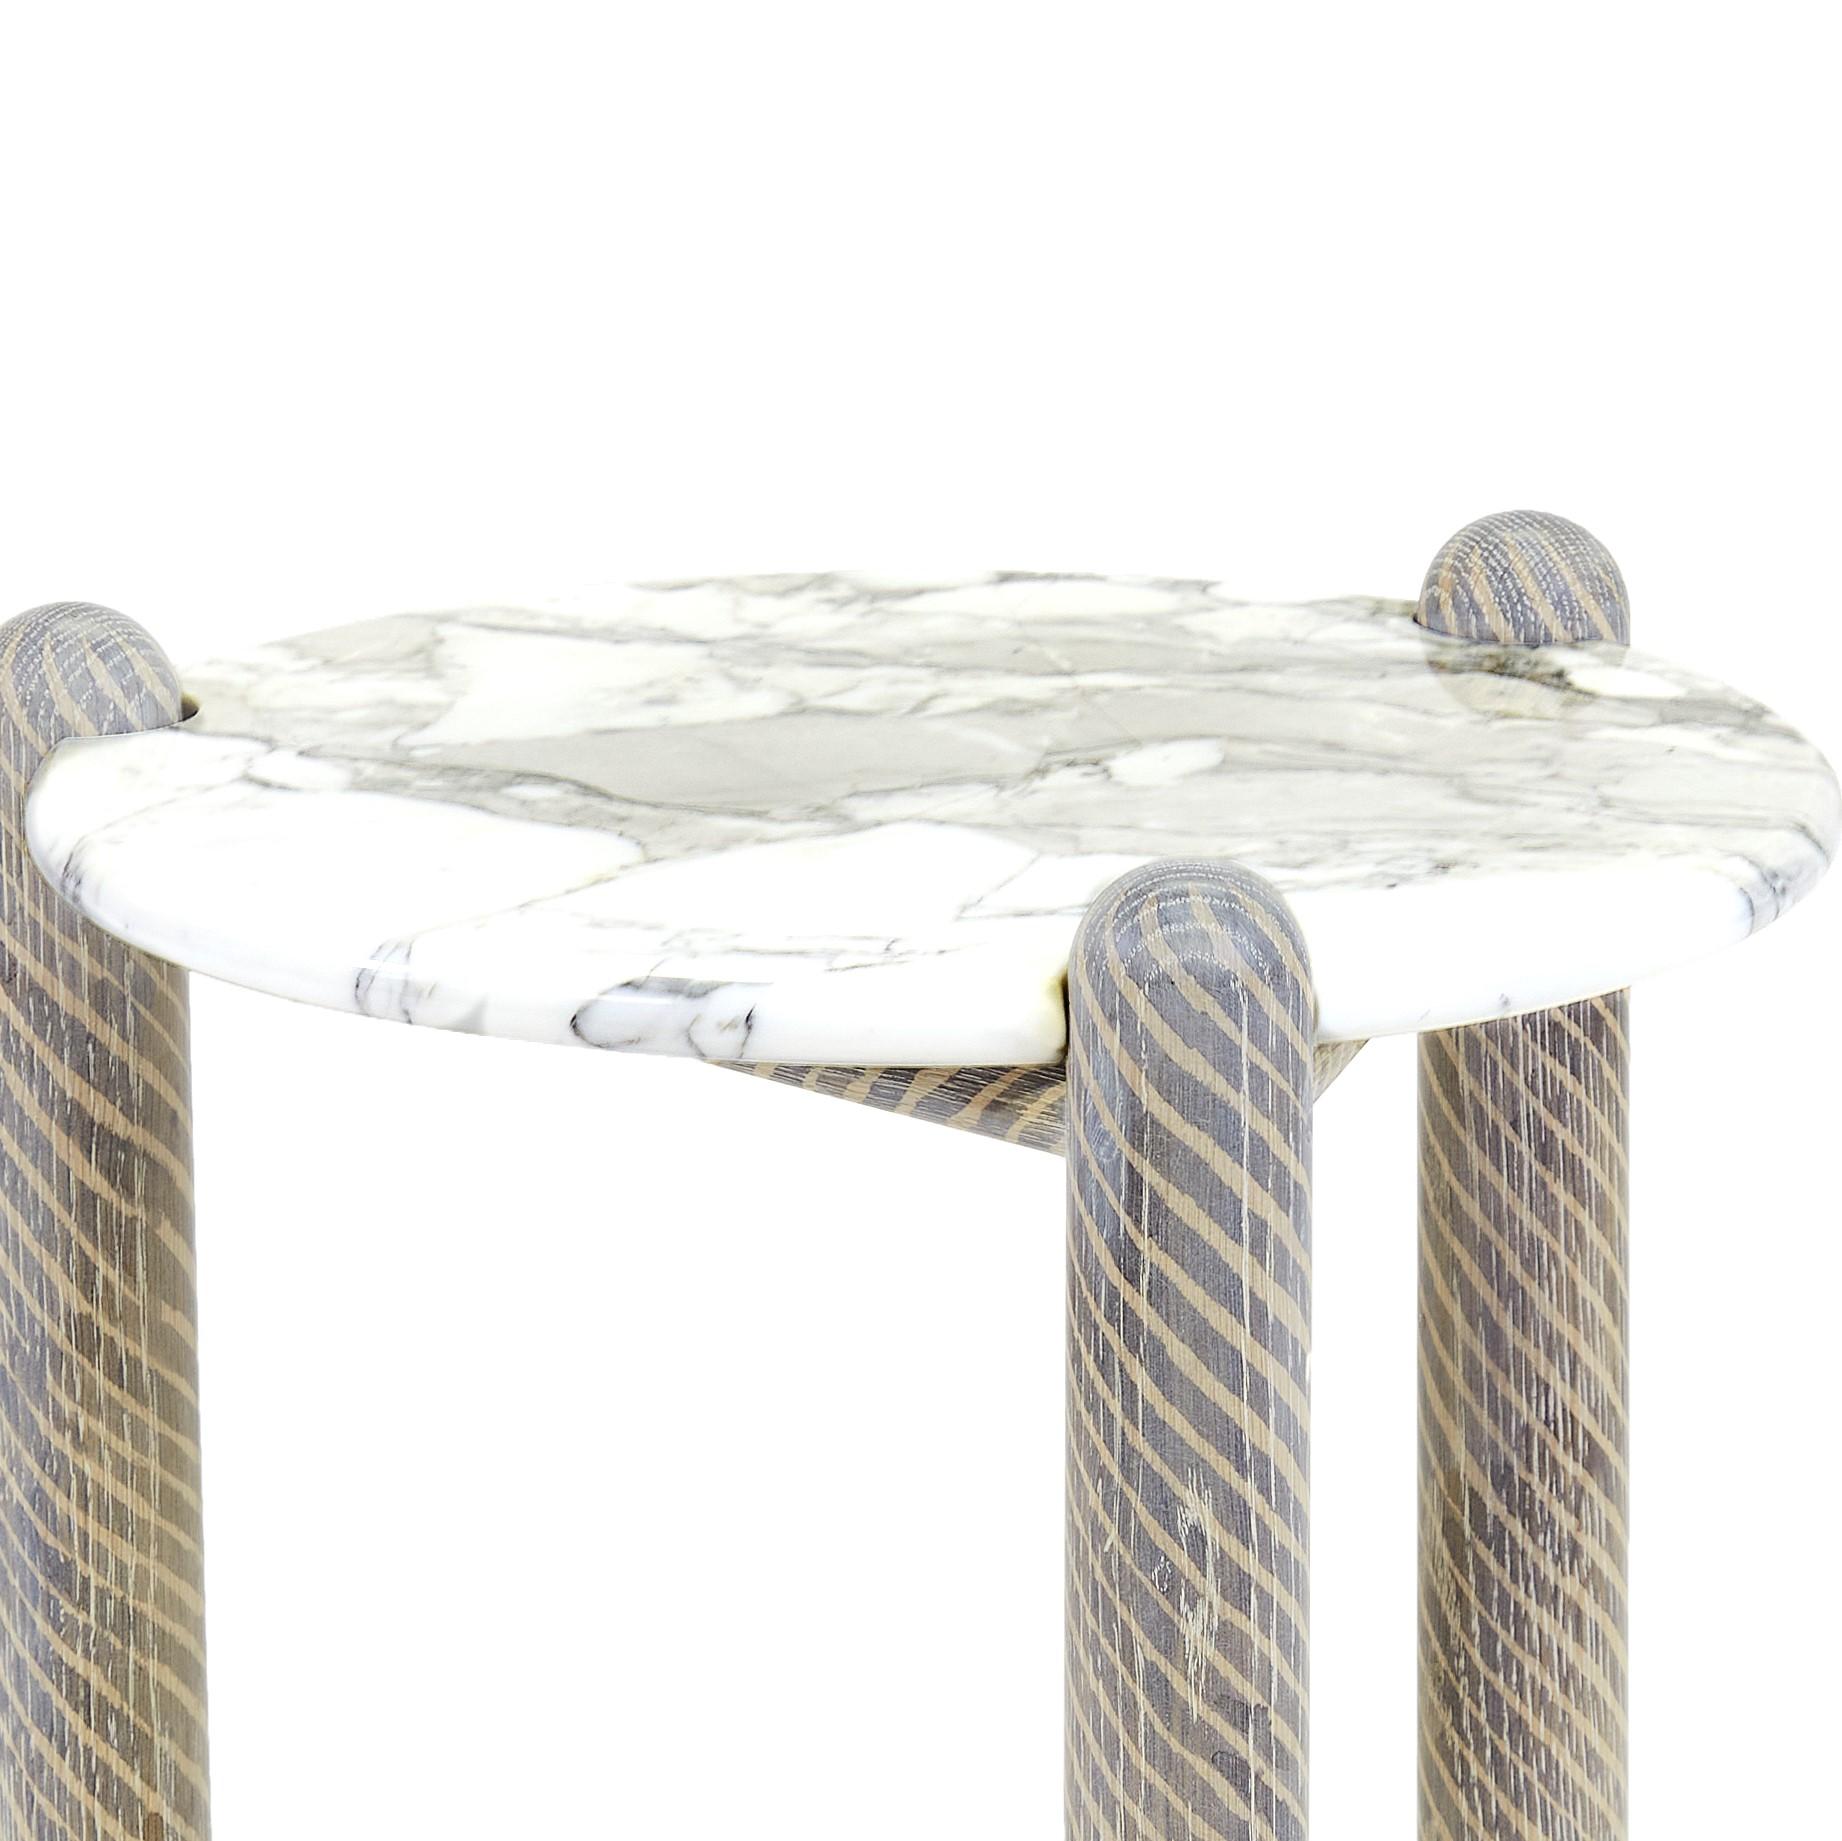 Captain's side table by Hamilton Holmes.
Oxalino Collection 
Dimensions: D 38.1, W 38.1, H 50.8 cm
Materials: White oak, Calcatta marble, natural Danish cord, oxidized treatment.

These solid oak three legged tables feature handwoven Danish